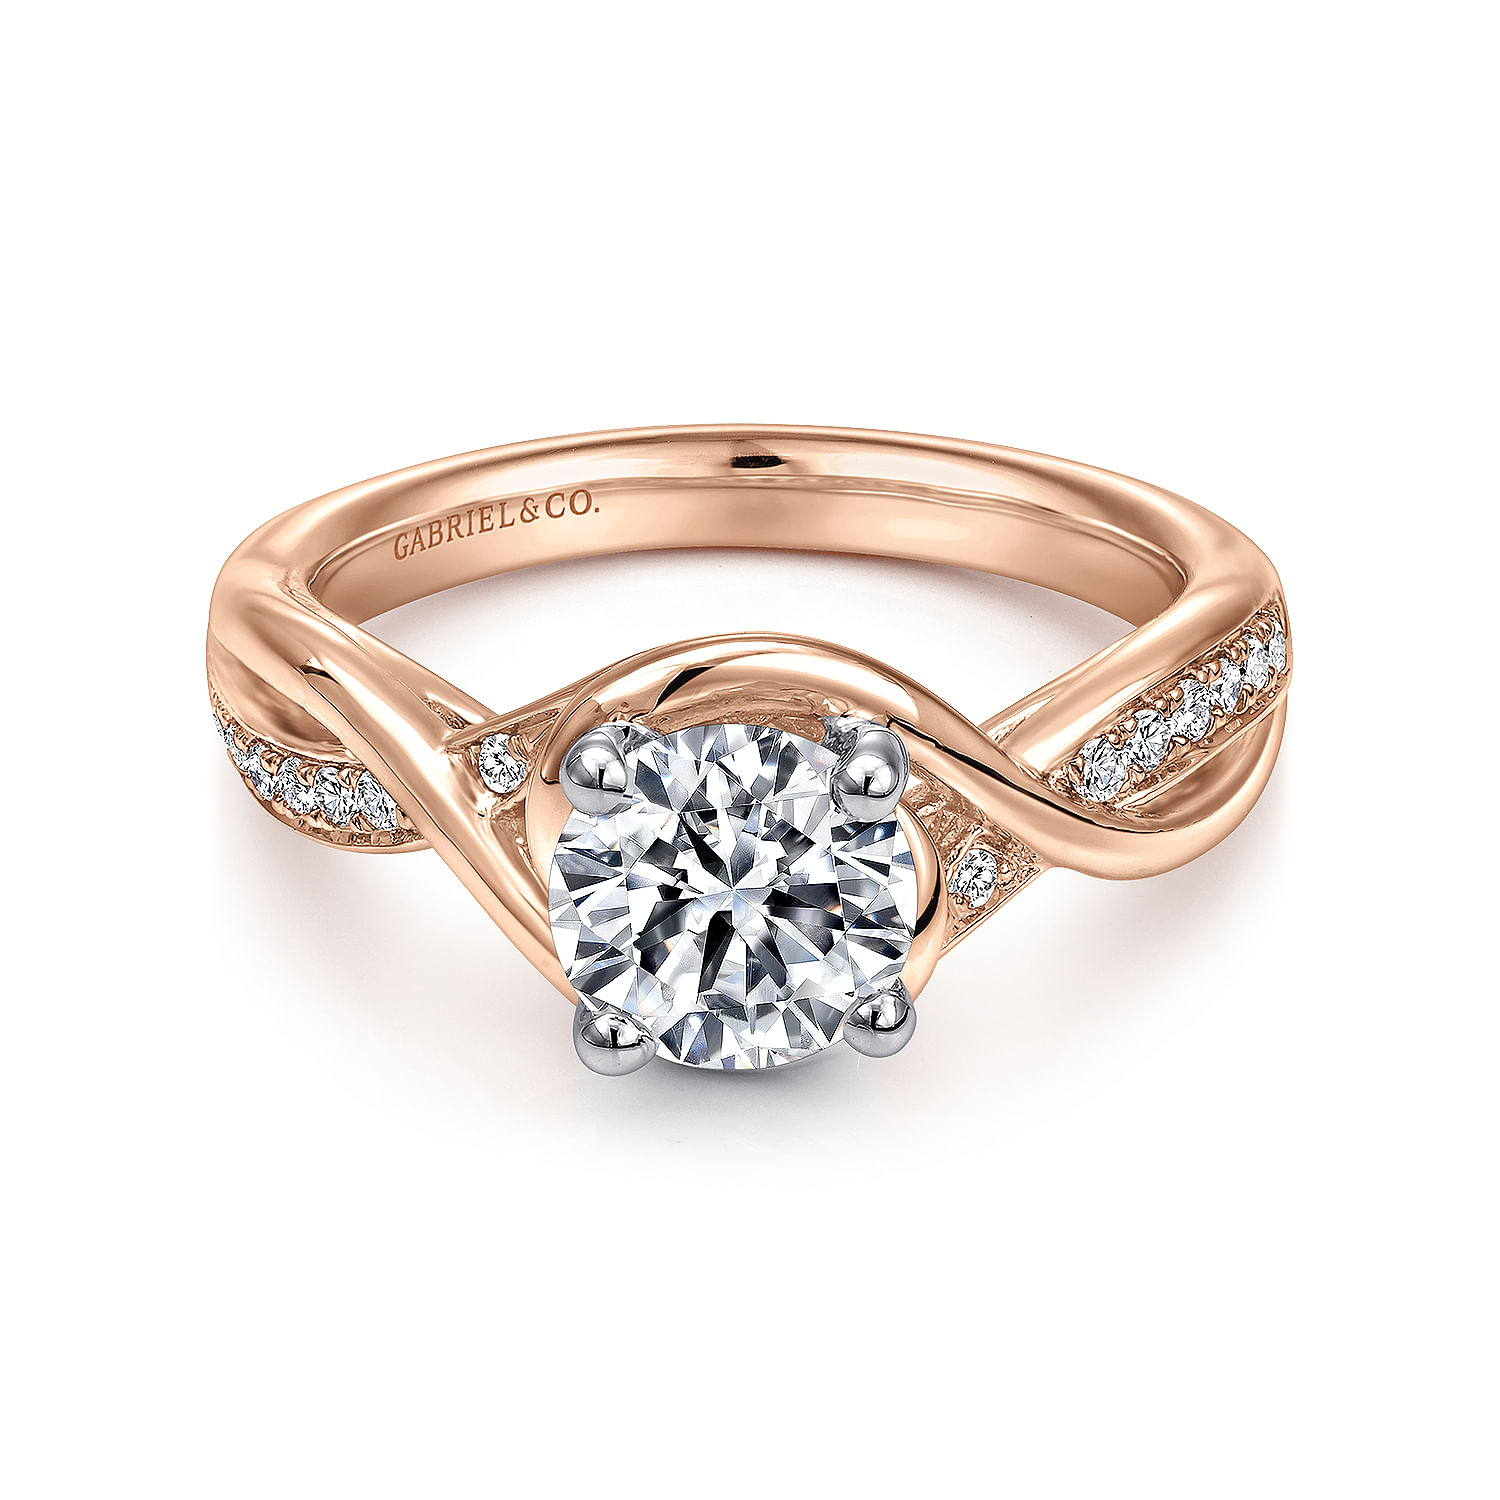 Bailey - 14K White-Rose Gold Round Diamond Bypass Engagement Ring